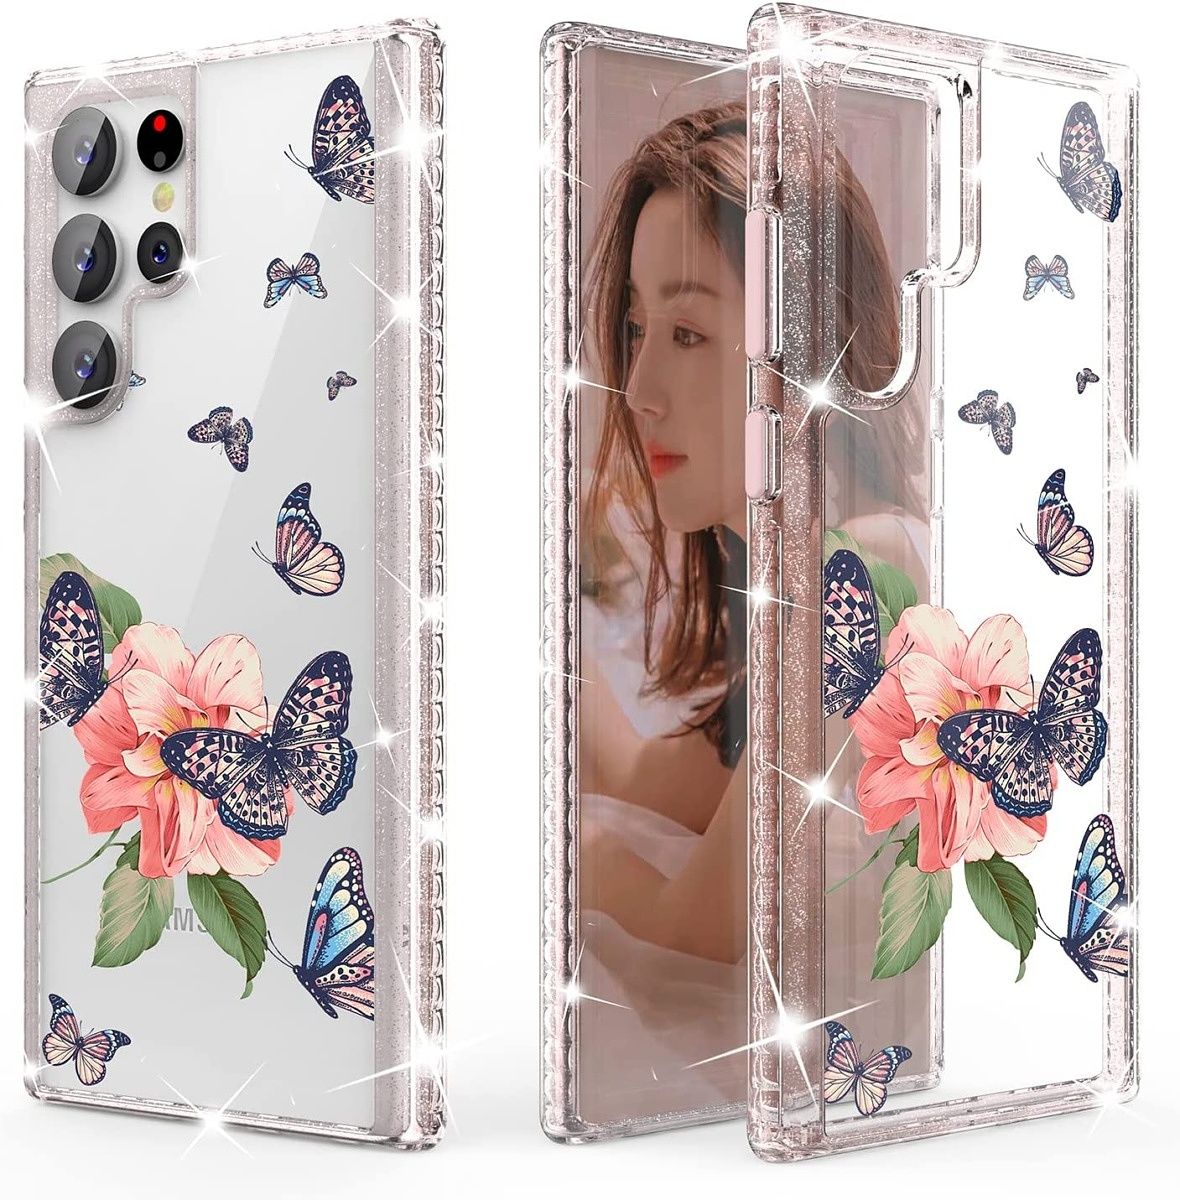 This shockproof case from WATACHE has a Spring-inspired print of butterflies and a flower. It's glittery and has a protective hybrid soft/hard build.